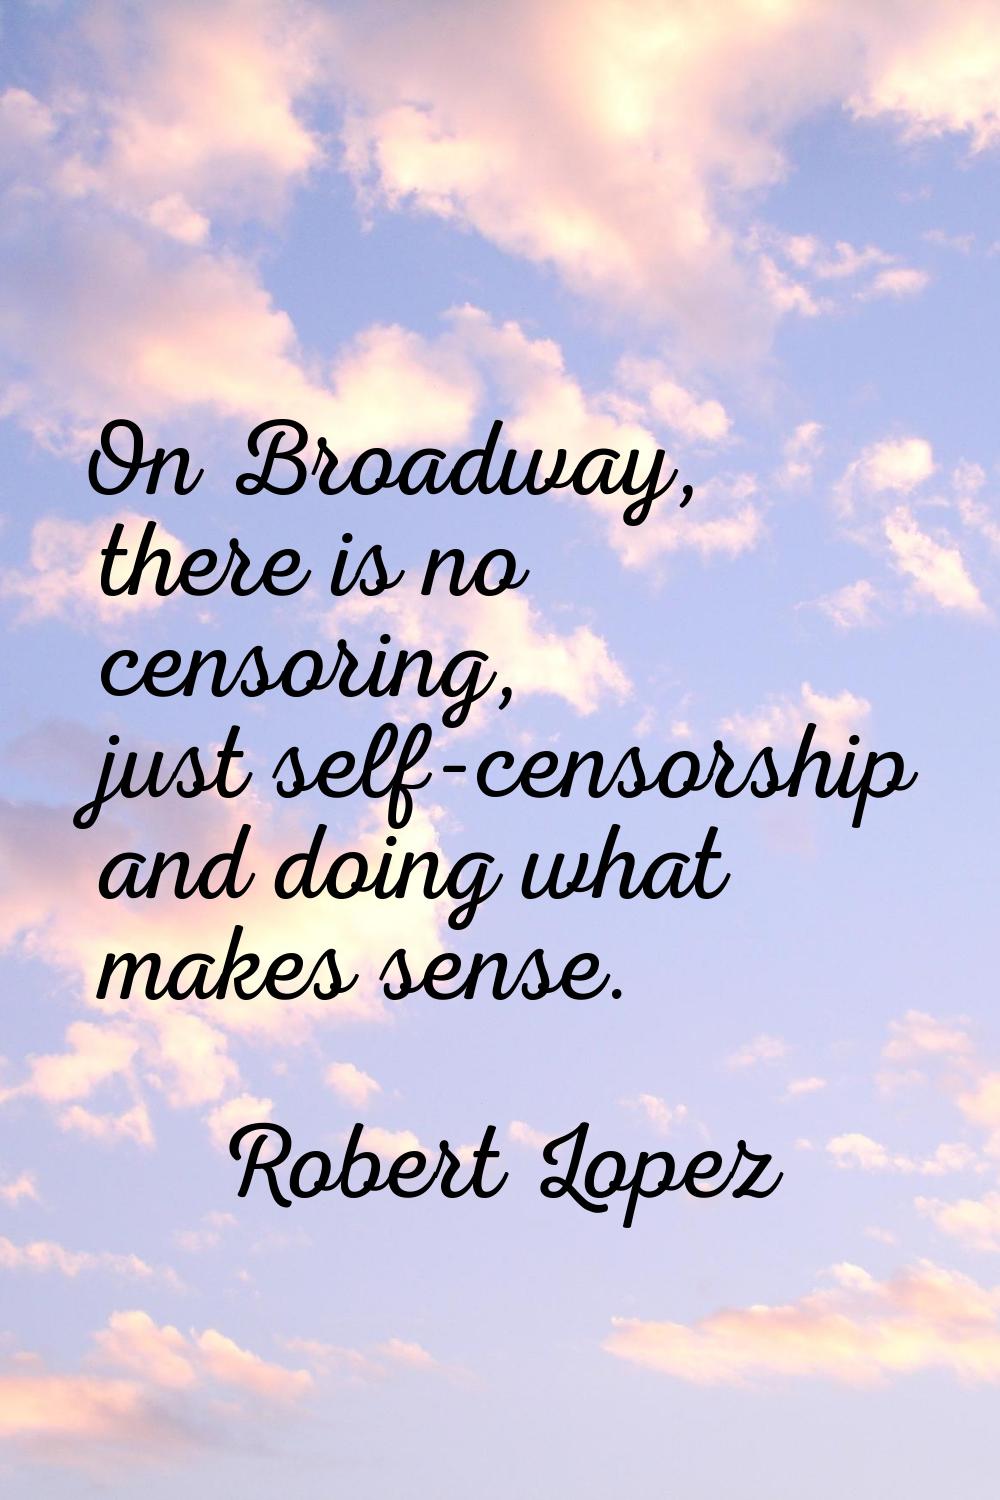 On Broadway, there is no censoring, just self-censorship and doing what makes sense.